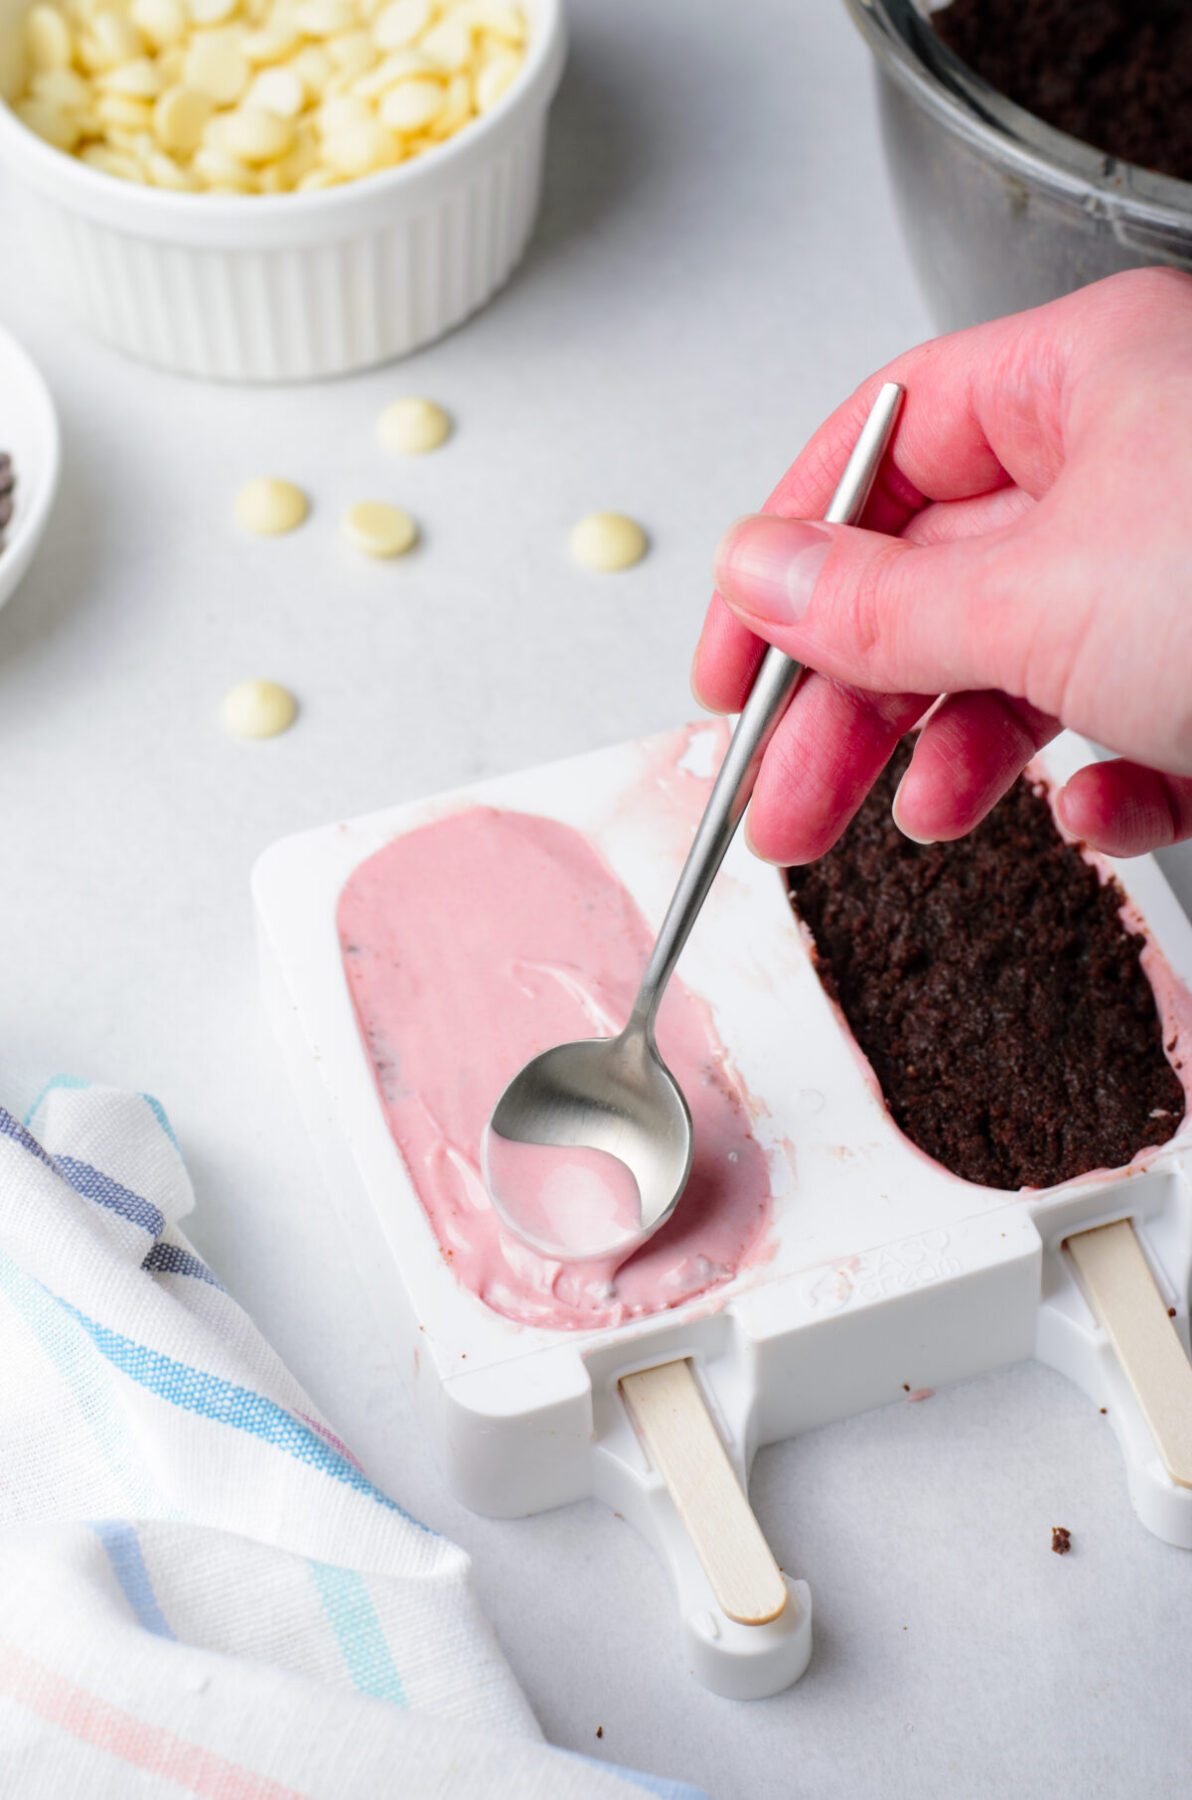 Cakesicles being made in cake pop mould.